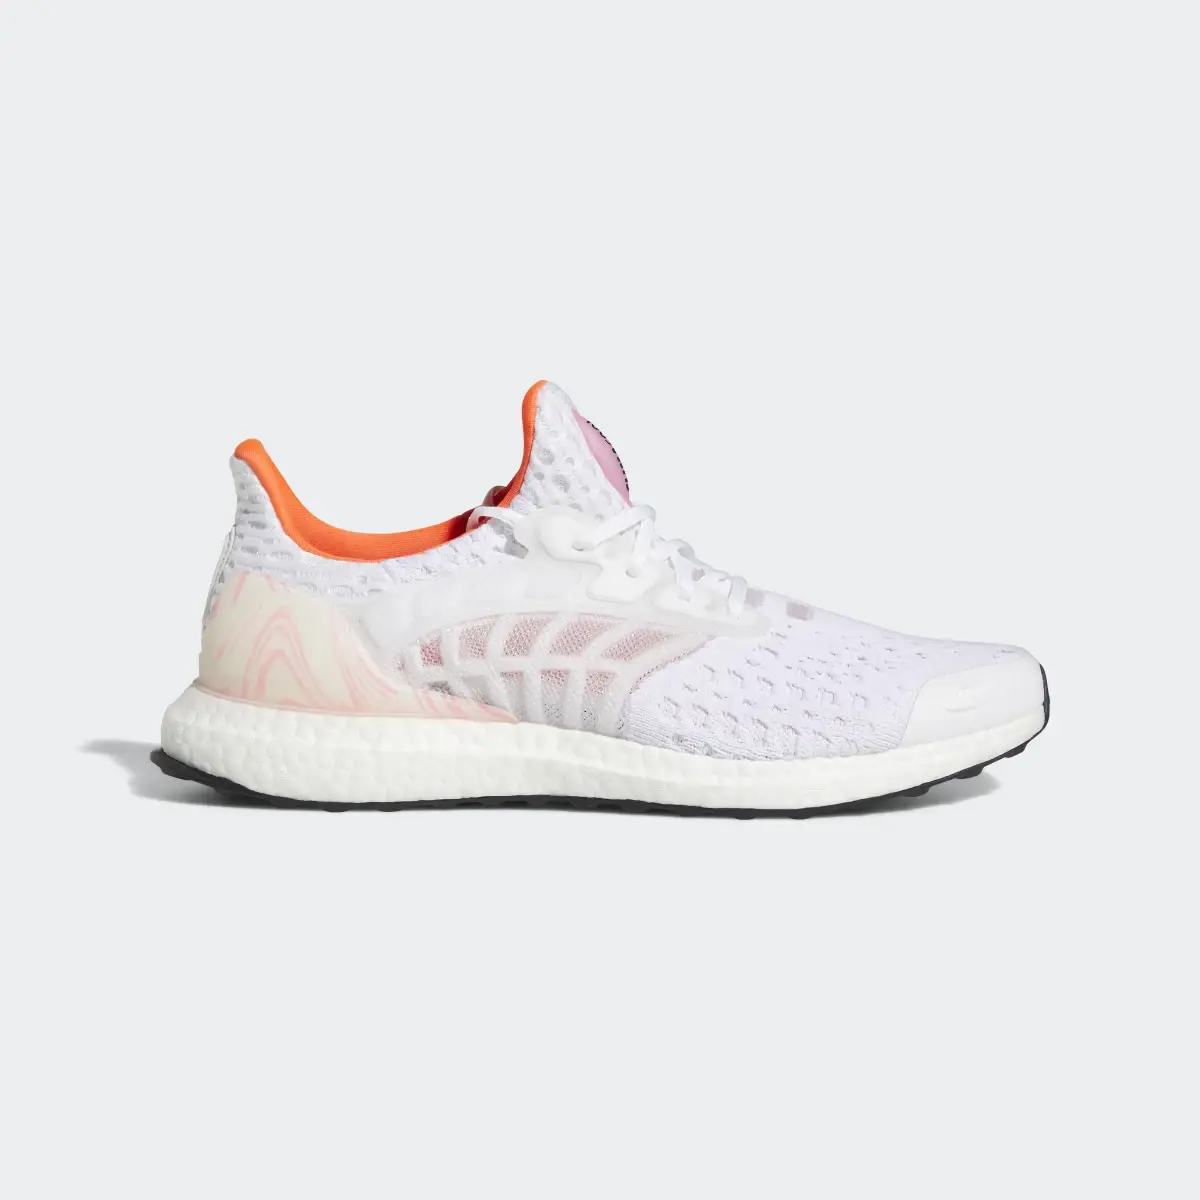 Adidas Ultraboost CC_2 DNA Climacool Running Sportswear Lifestyle Shoes. 2